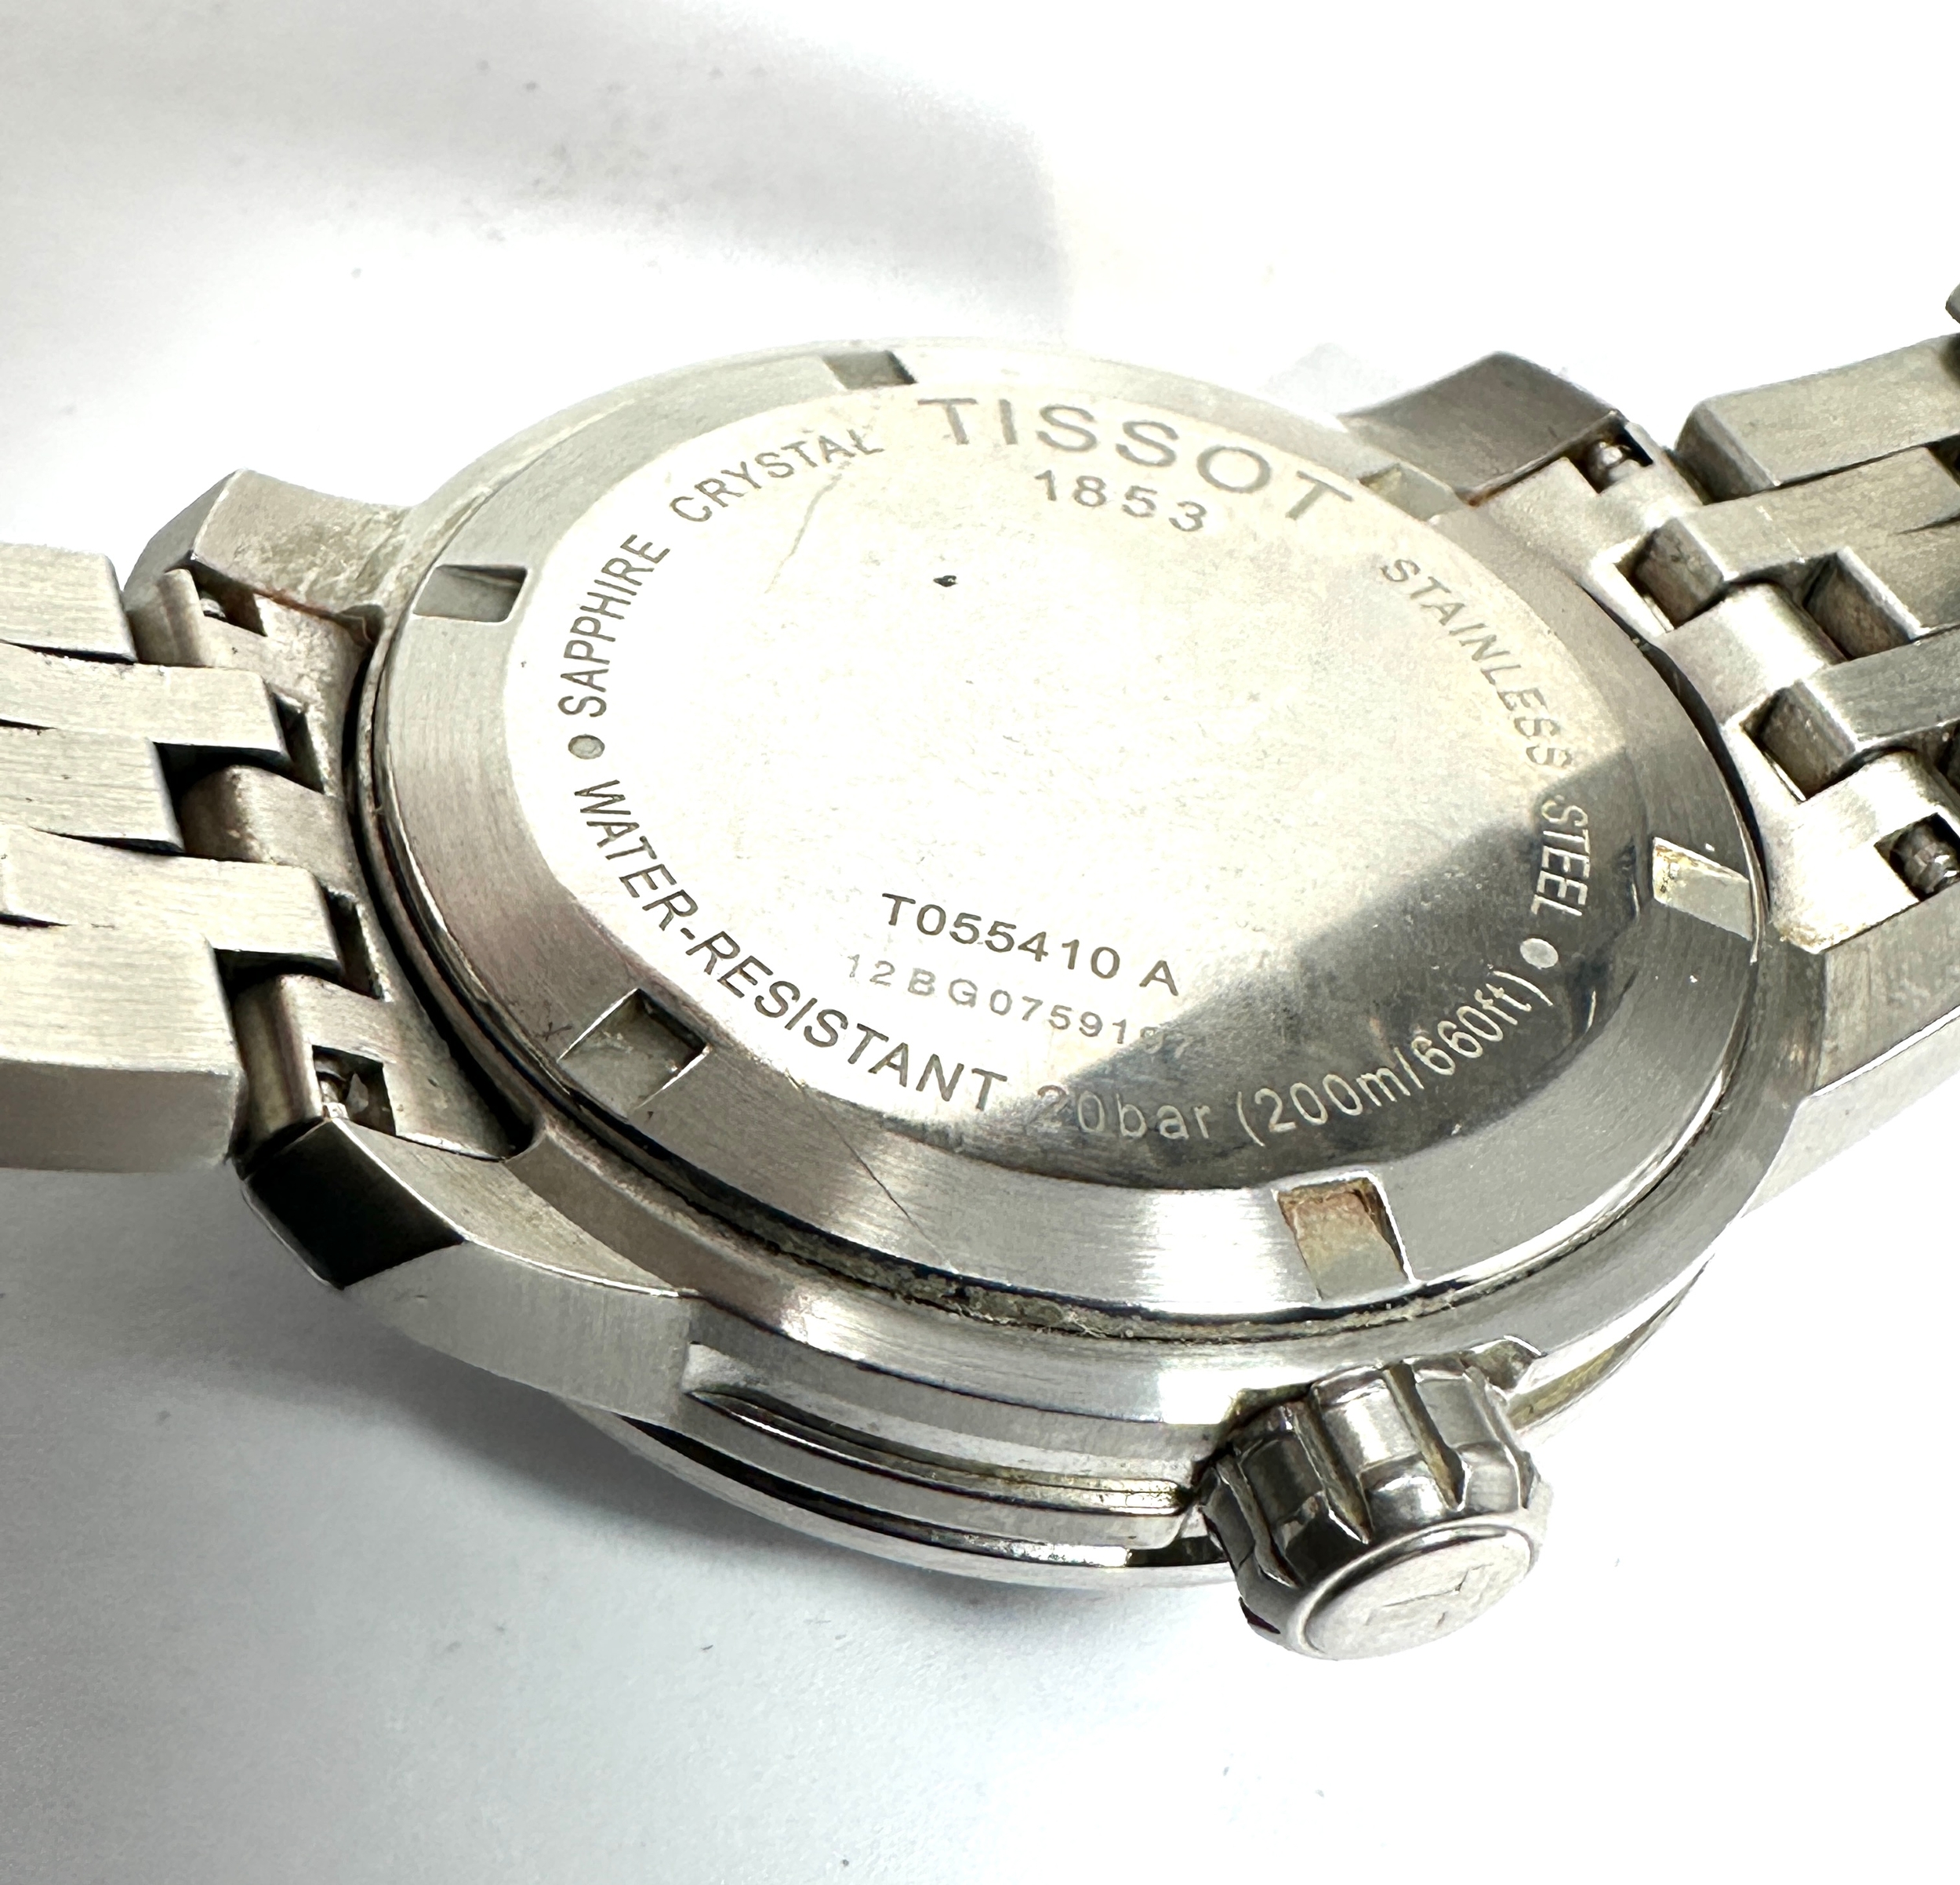 Gents Tissot 1853 quartz to55410a the watch does tick - Image 5 of 5